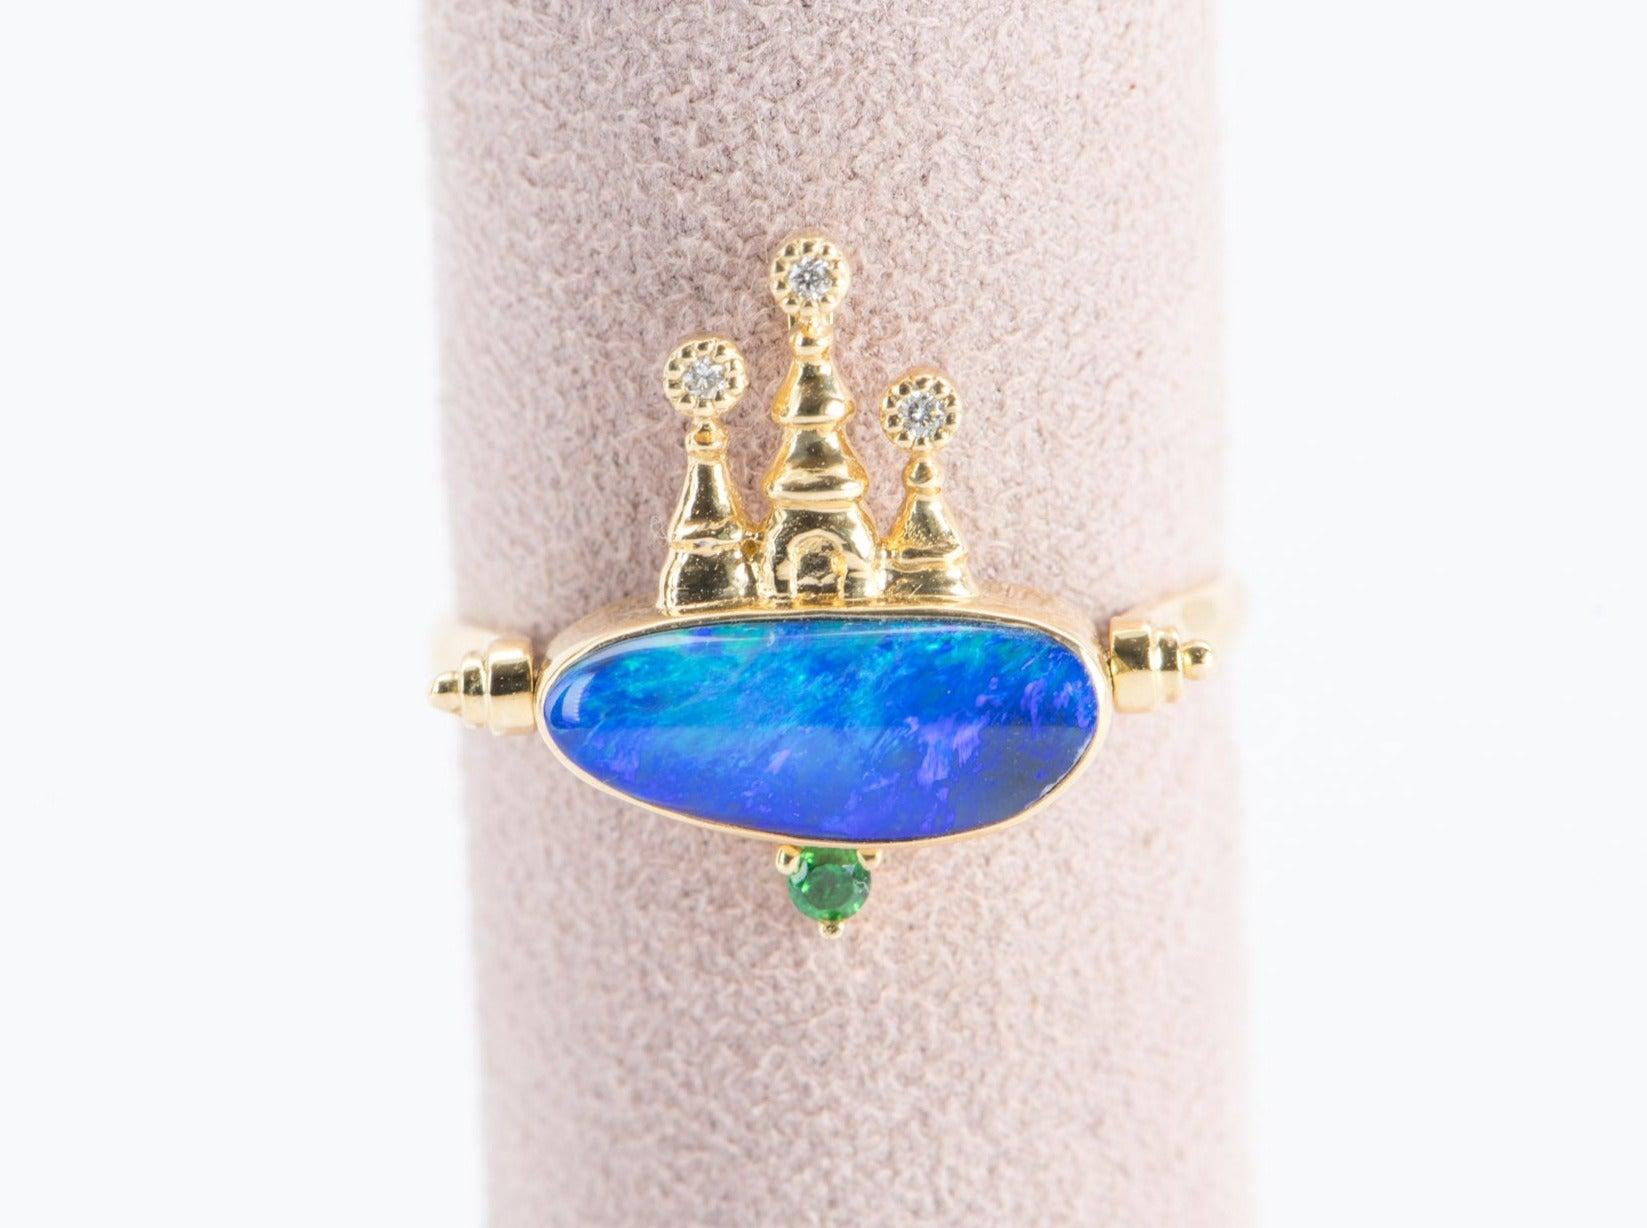 ♥ Solid 18k yellow gold castle pendant set with a beautiful doublet Australian Opal, diamonds, and tsavorite

♥This pendant can also be converted into a ring
♥ Gorgeous blue color!
♥ The item measures 16.2 mm in length, 12.6 mm in width, and is 5 mm